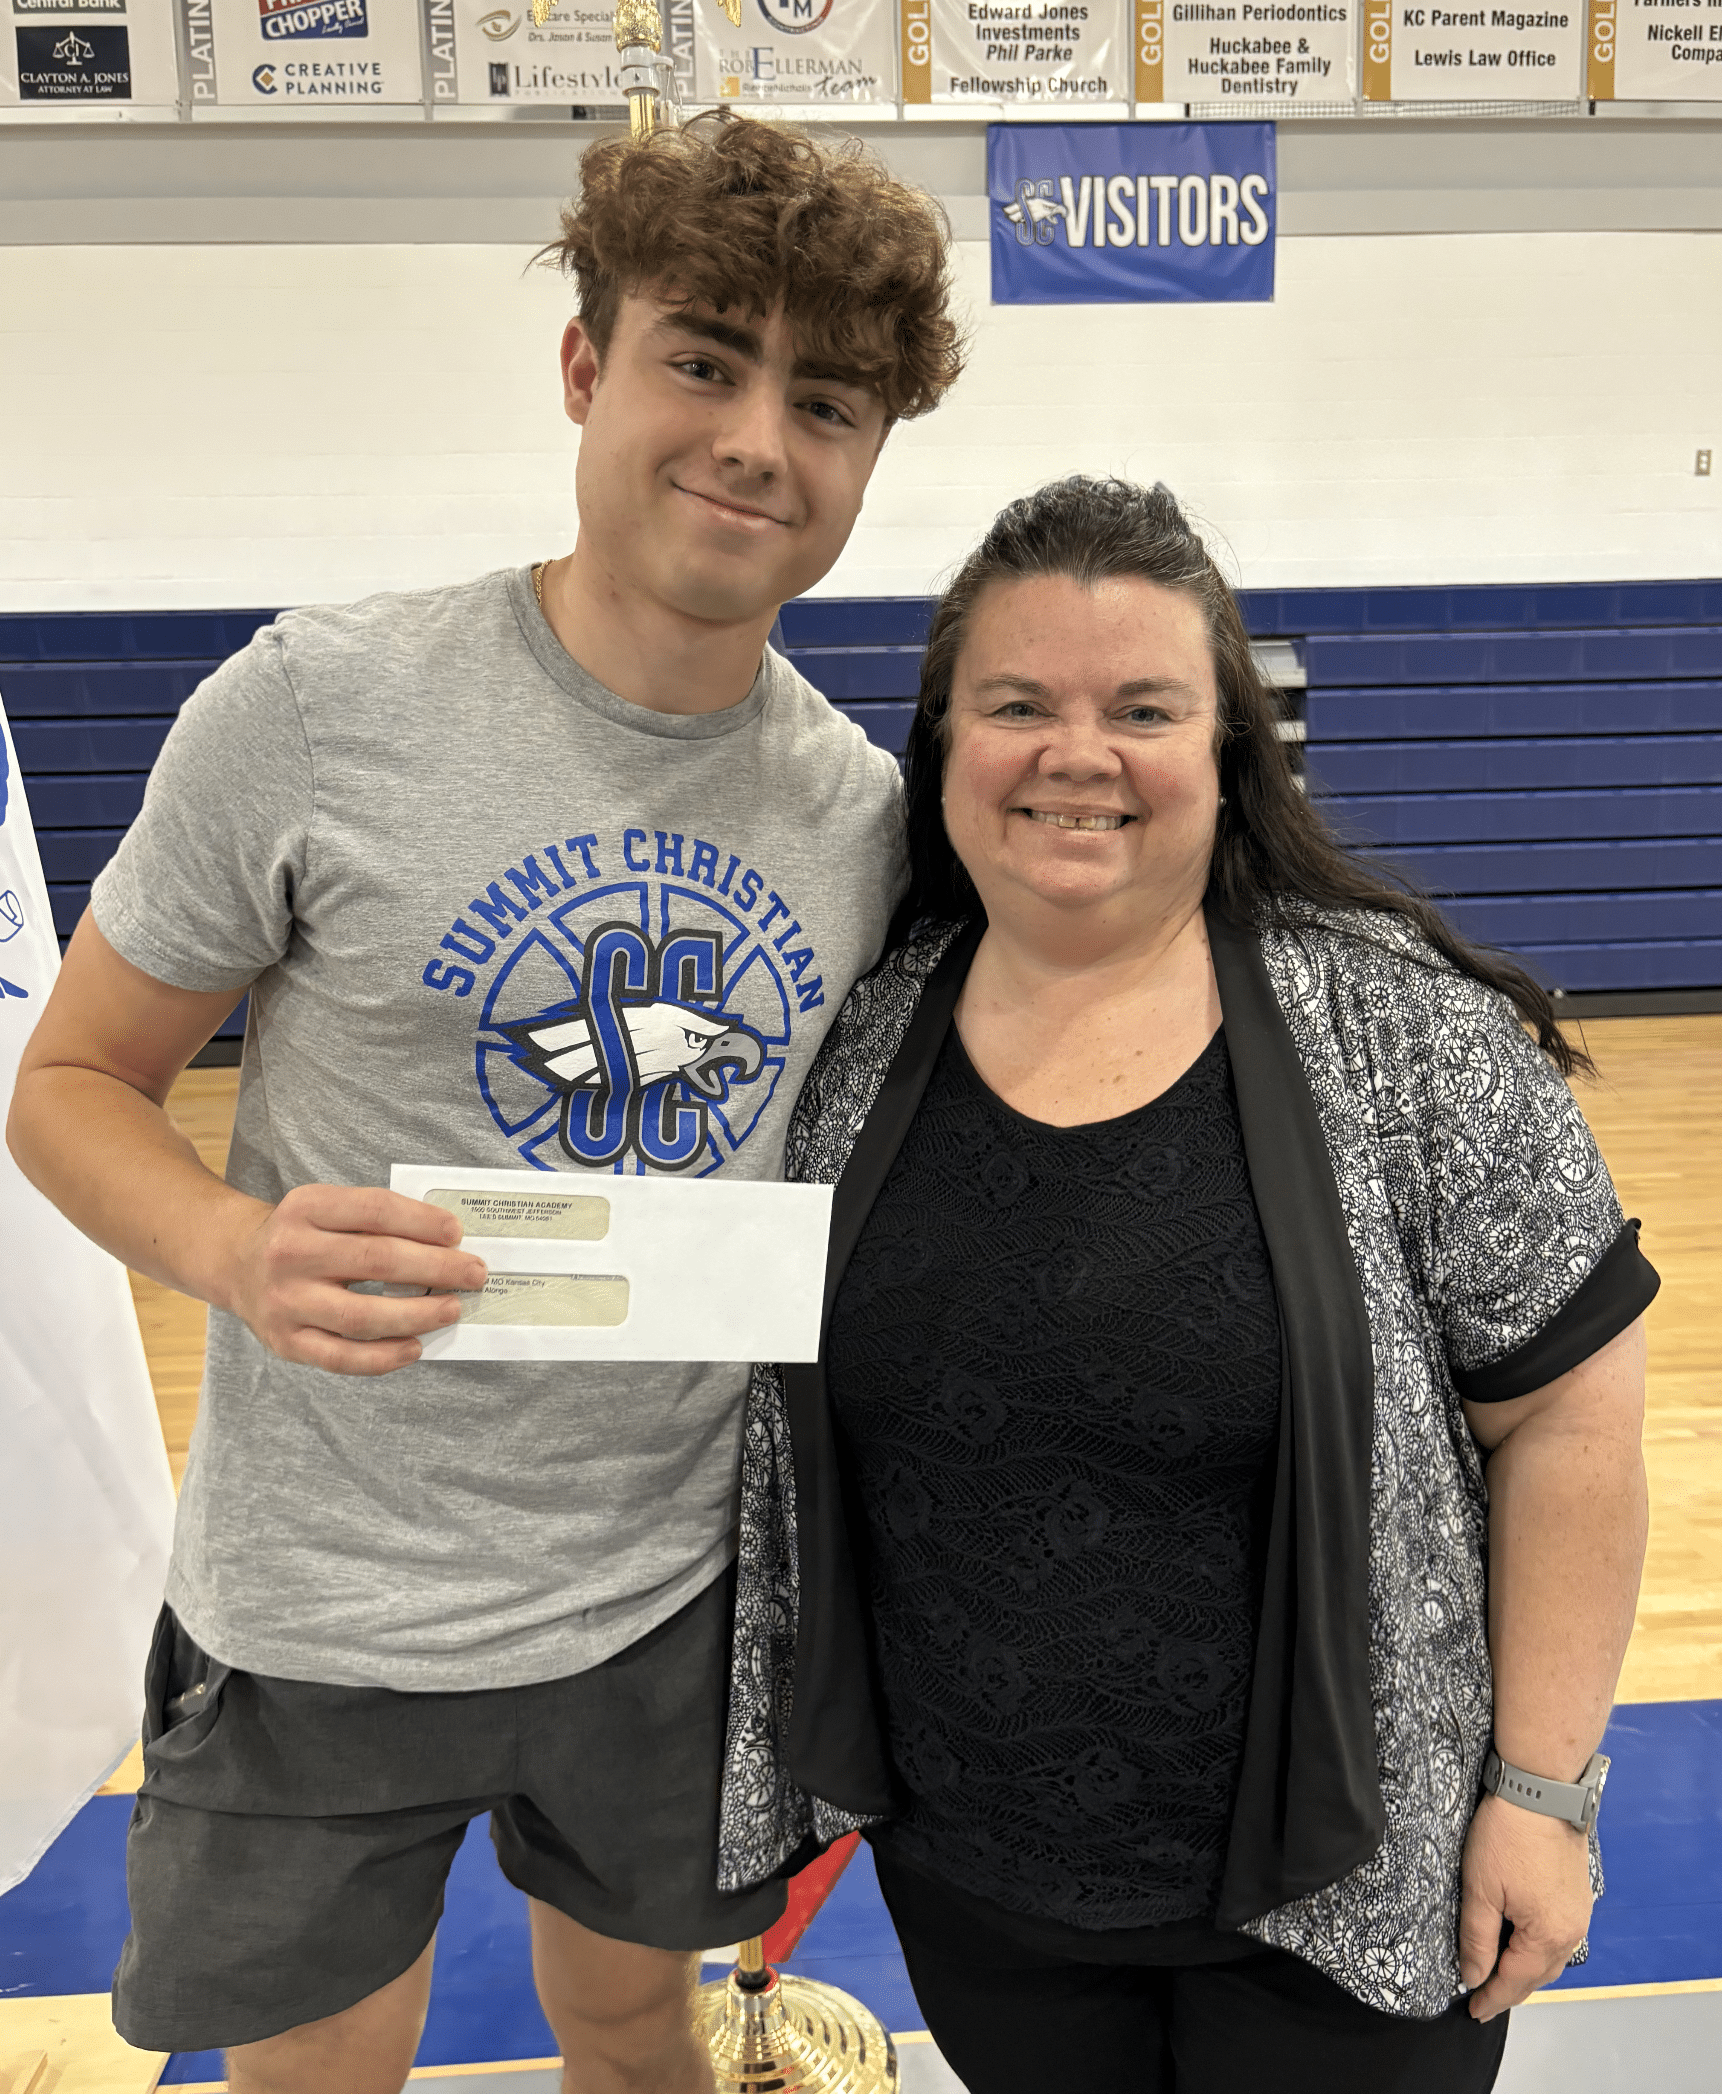 SCA senior Daniel Alonge, pictured with SCA Business Teacher Georgia Duncan, was the recipient of the Summit Christian Academy Entrepreneurship Scholarship for his plan “Fresh n’ Fit” a cafe and supplement store.